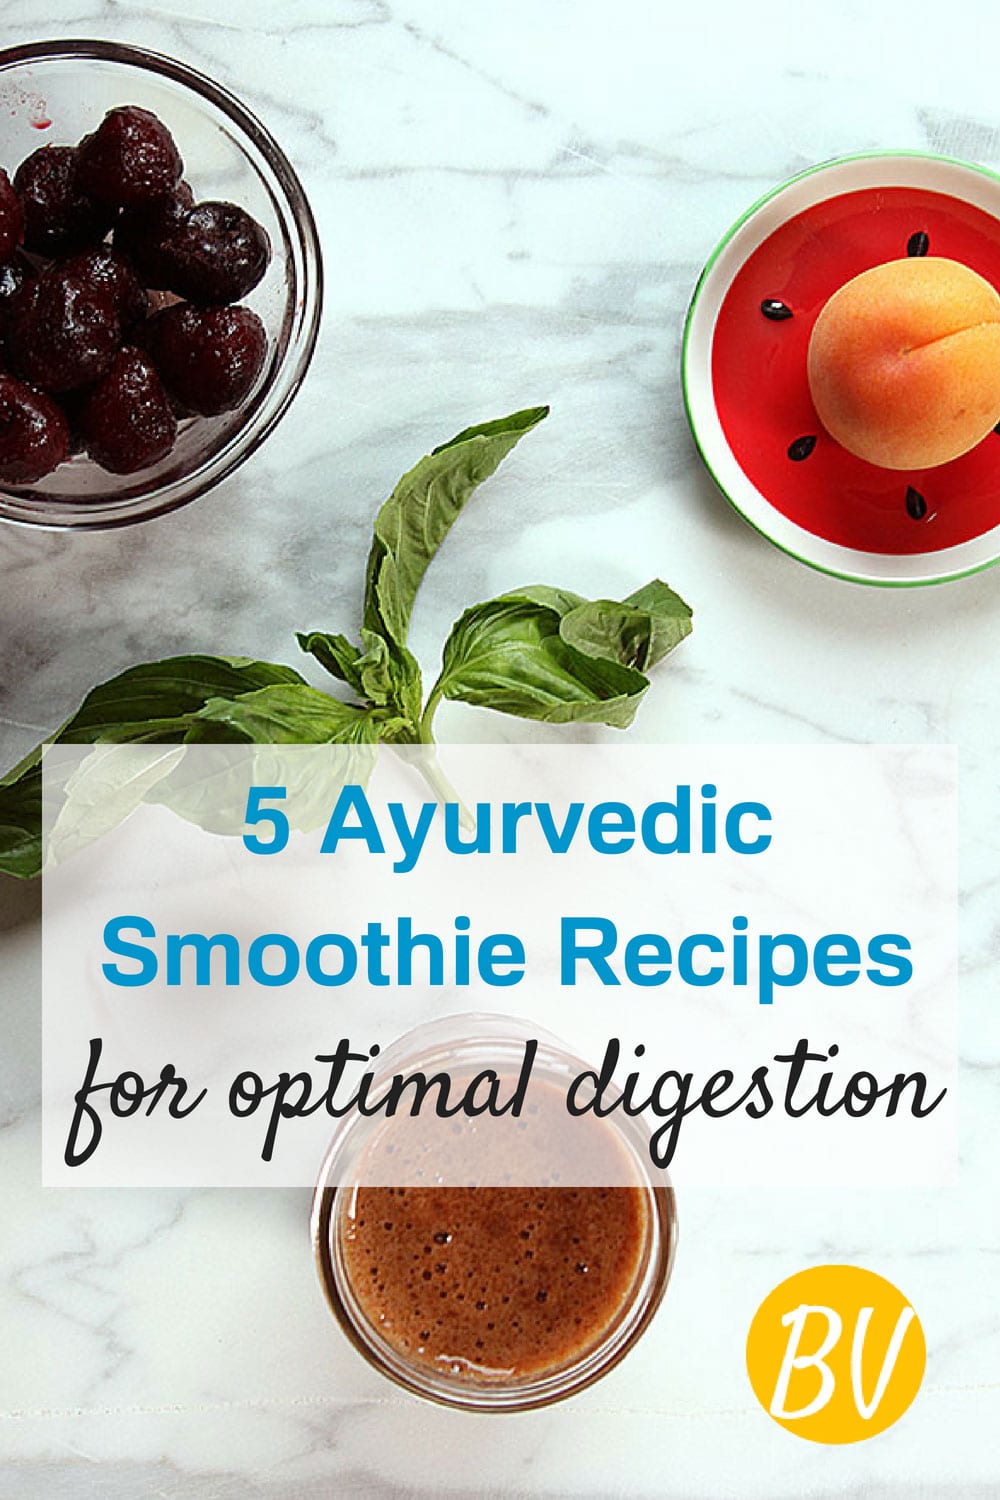 5 Ayurvedic Smoothie Recipes For Optimal Digestion